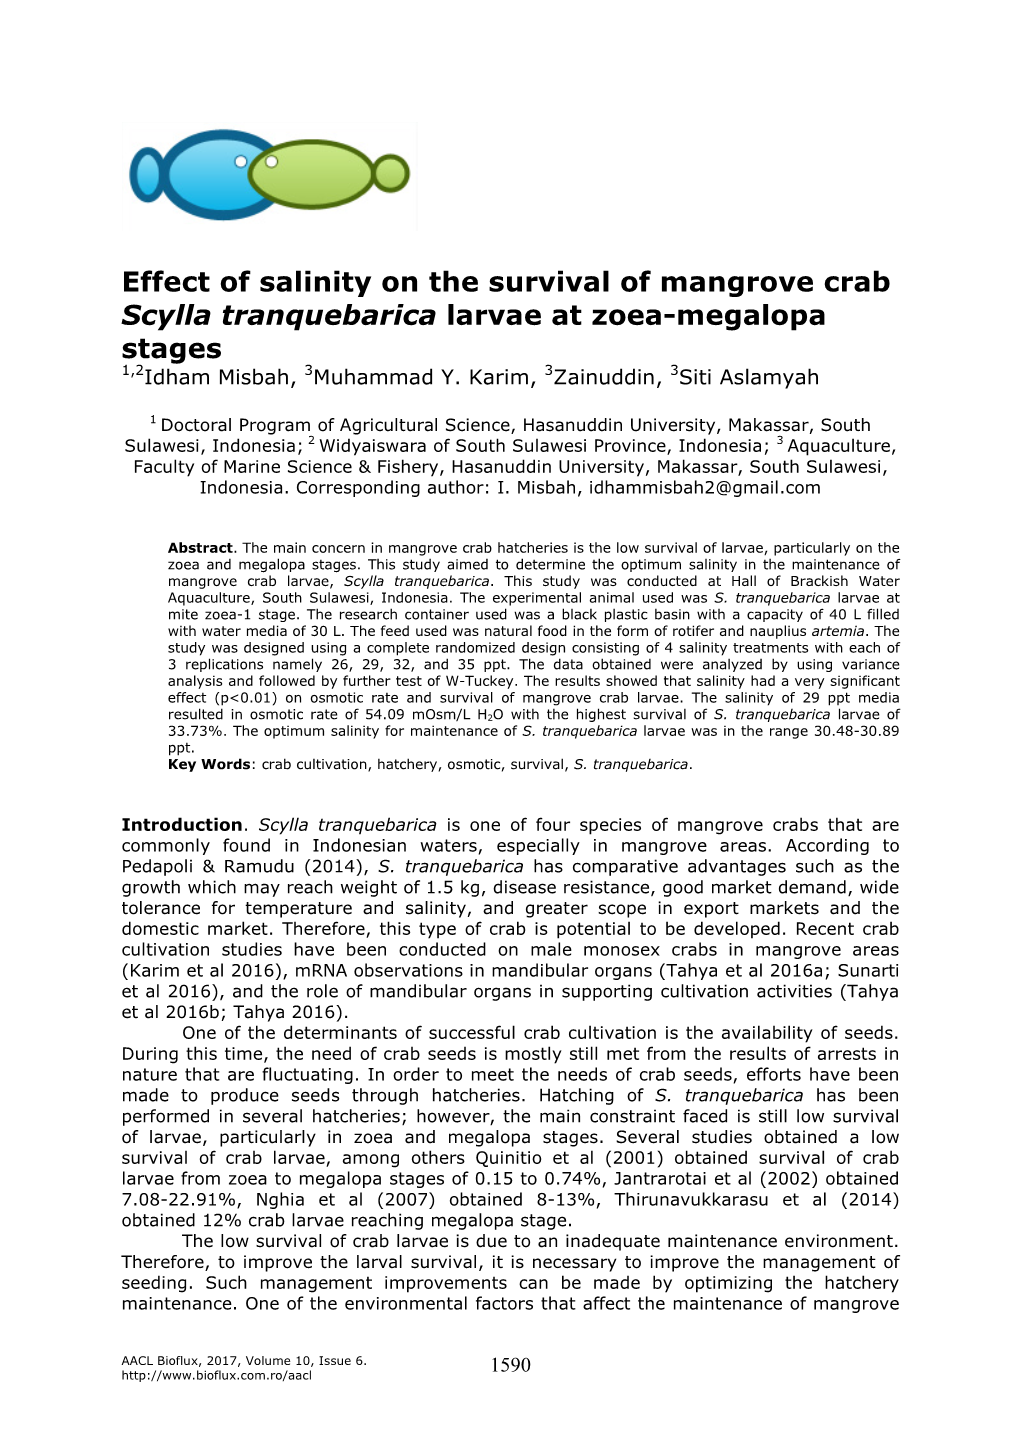 Effect of Salinity on the Survival of Mangrove Crab Scylla Tranquebarica Larvae at Zoea-Megalopa Stages 1,2Idham Misbah, 3Muhammad Y